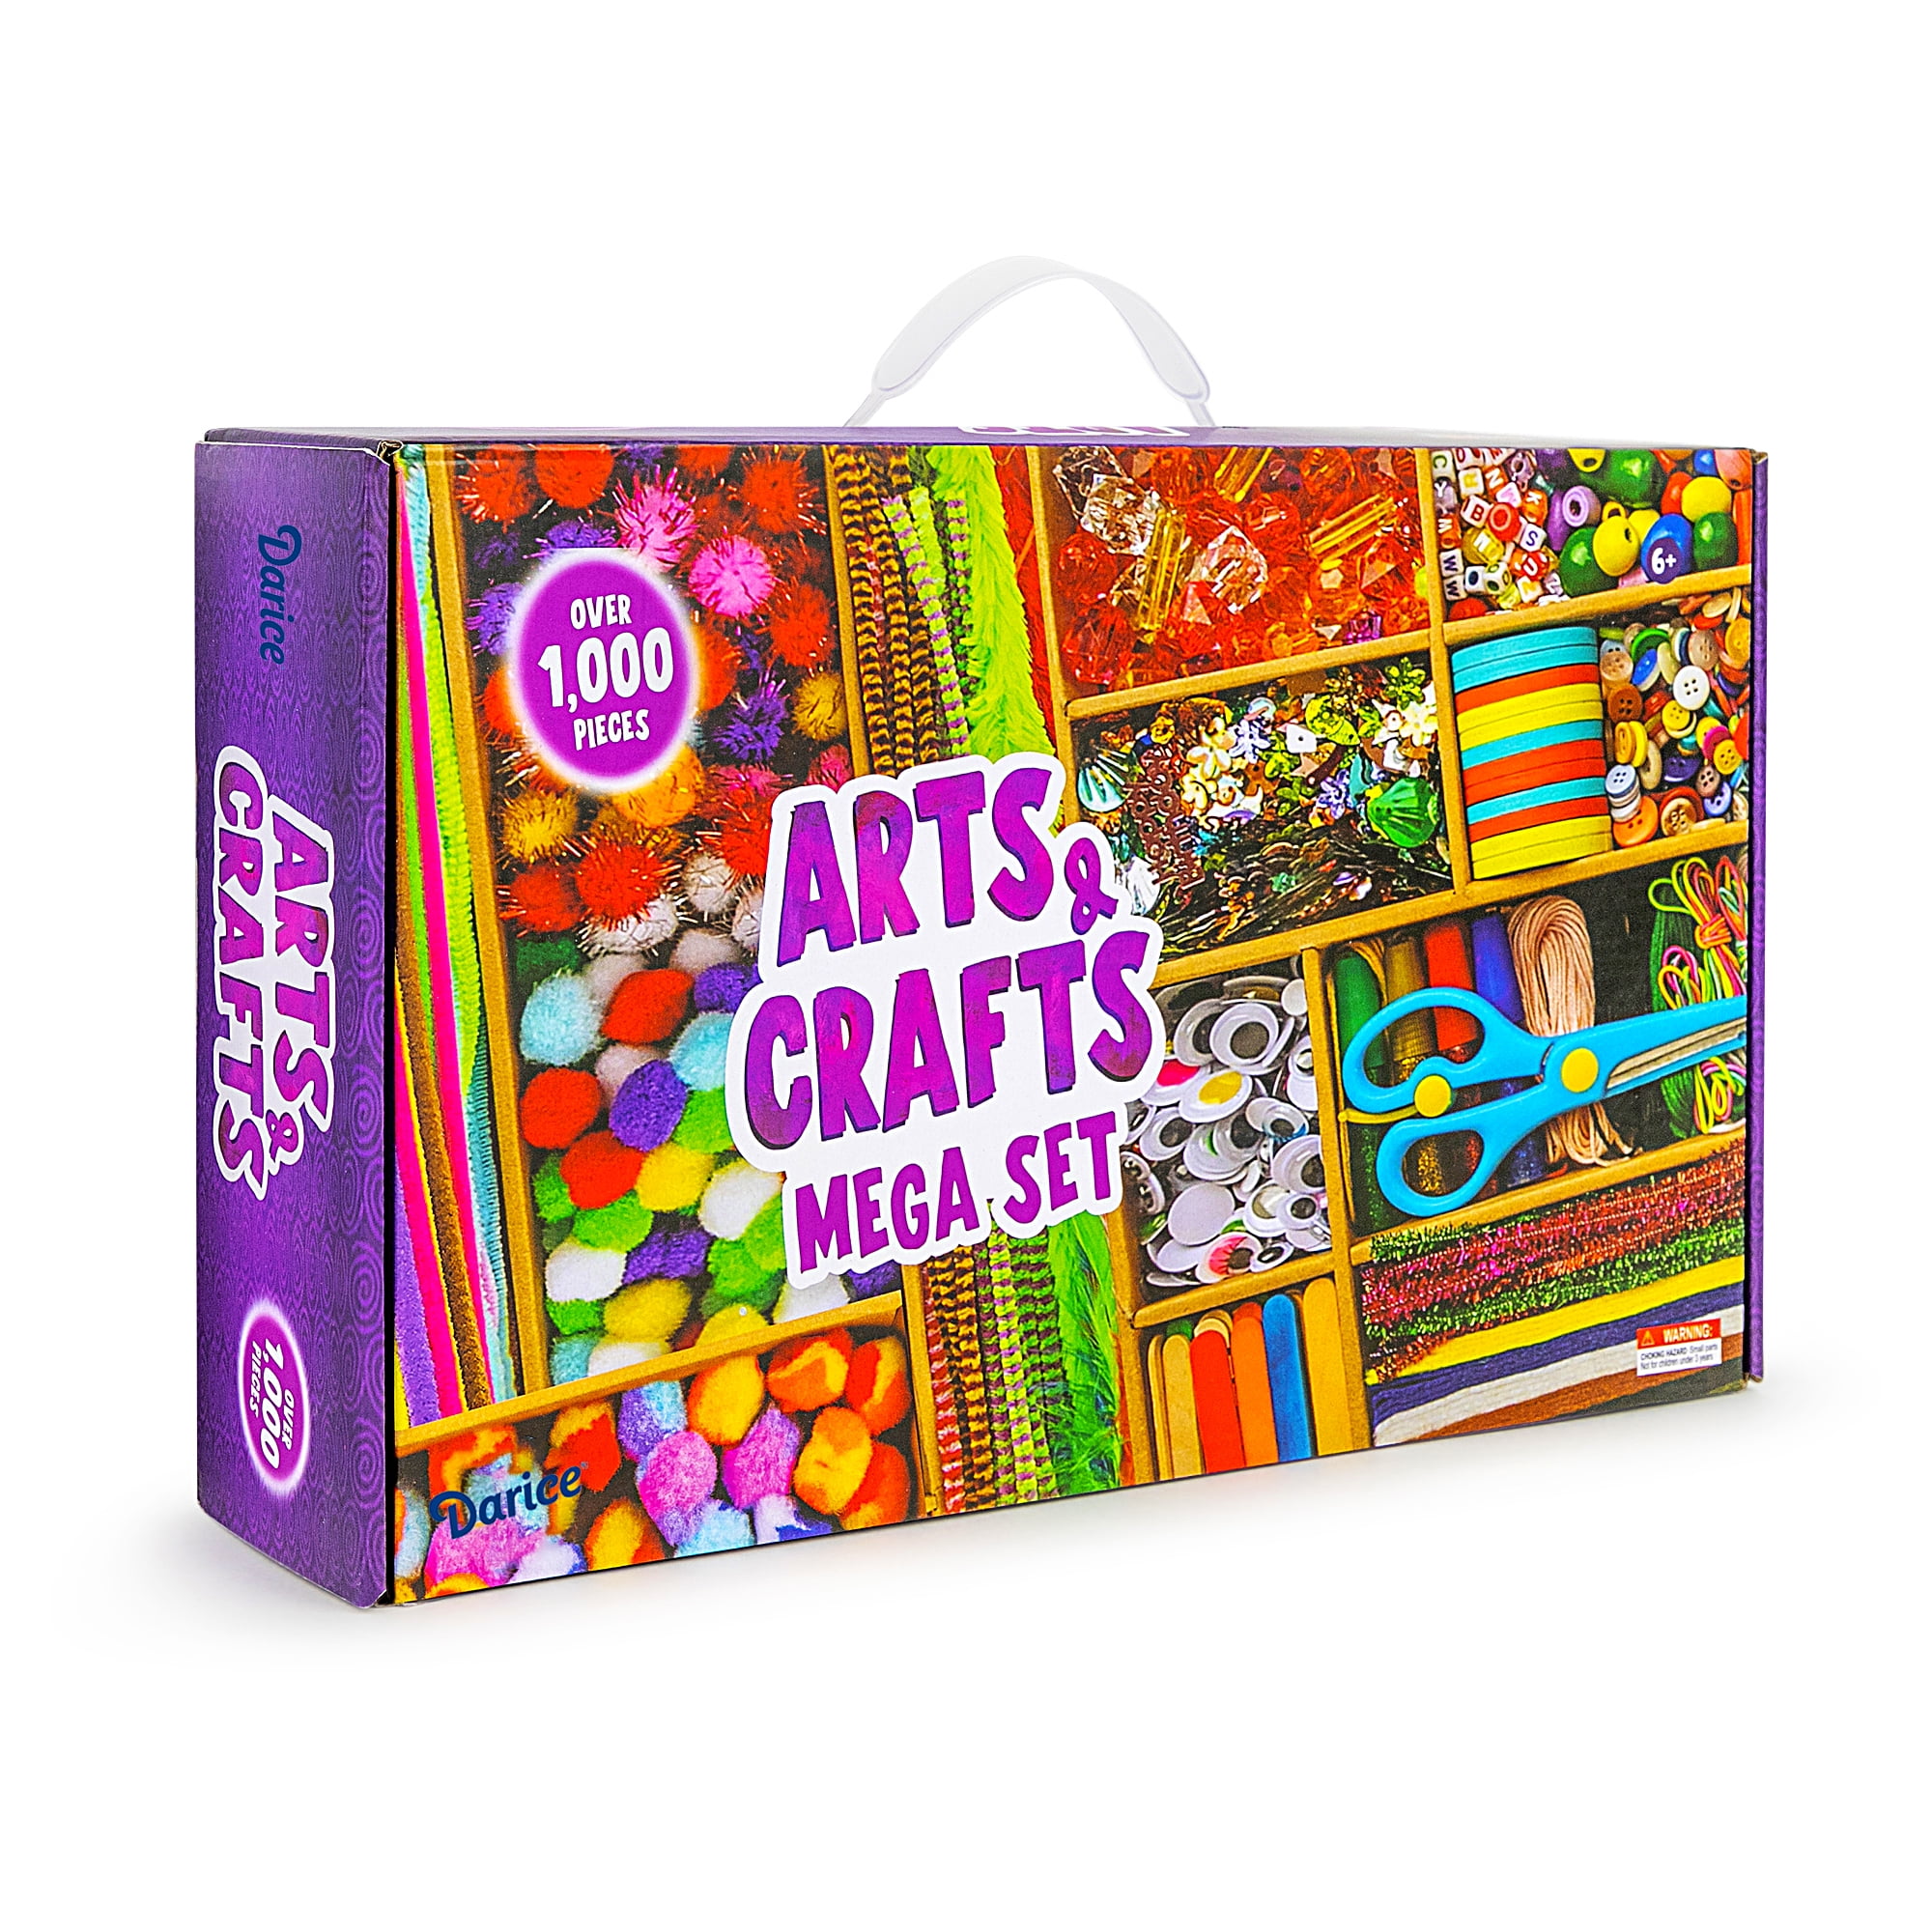  Dylan & Rylie Kids Arts & Crafts Kit - 1000+ Piece Creative  Supplies Set for Ages 4-12, Ideal for Fun & Learning : Toys & Games